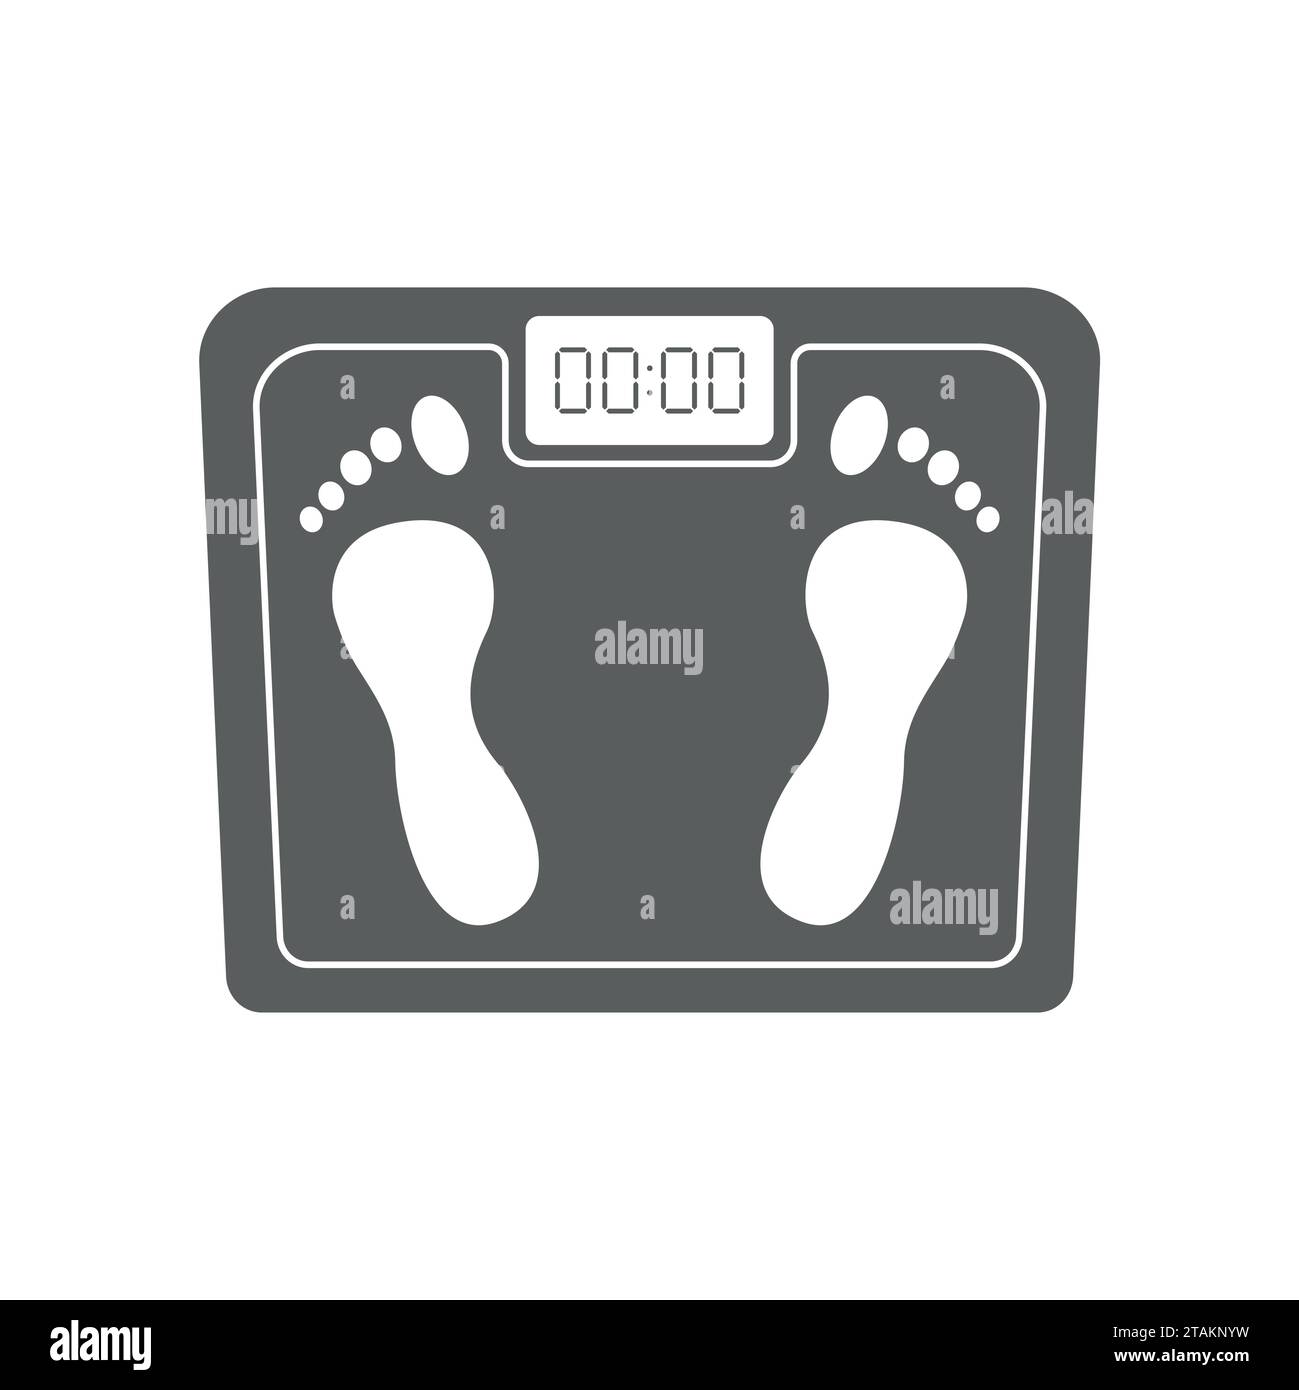 Scales icon isolated on white background. Personal human scales overweight, dieting healthcare balance object. Body measure scales icon lifestyle Stock Vector